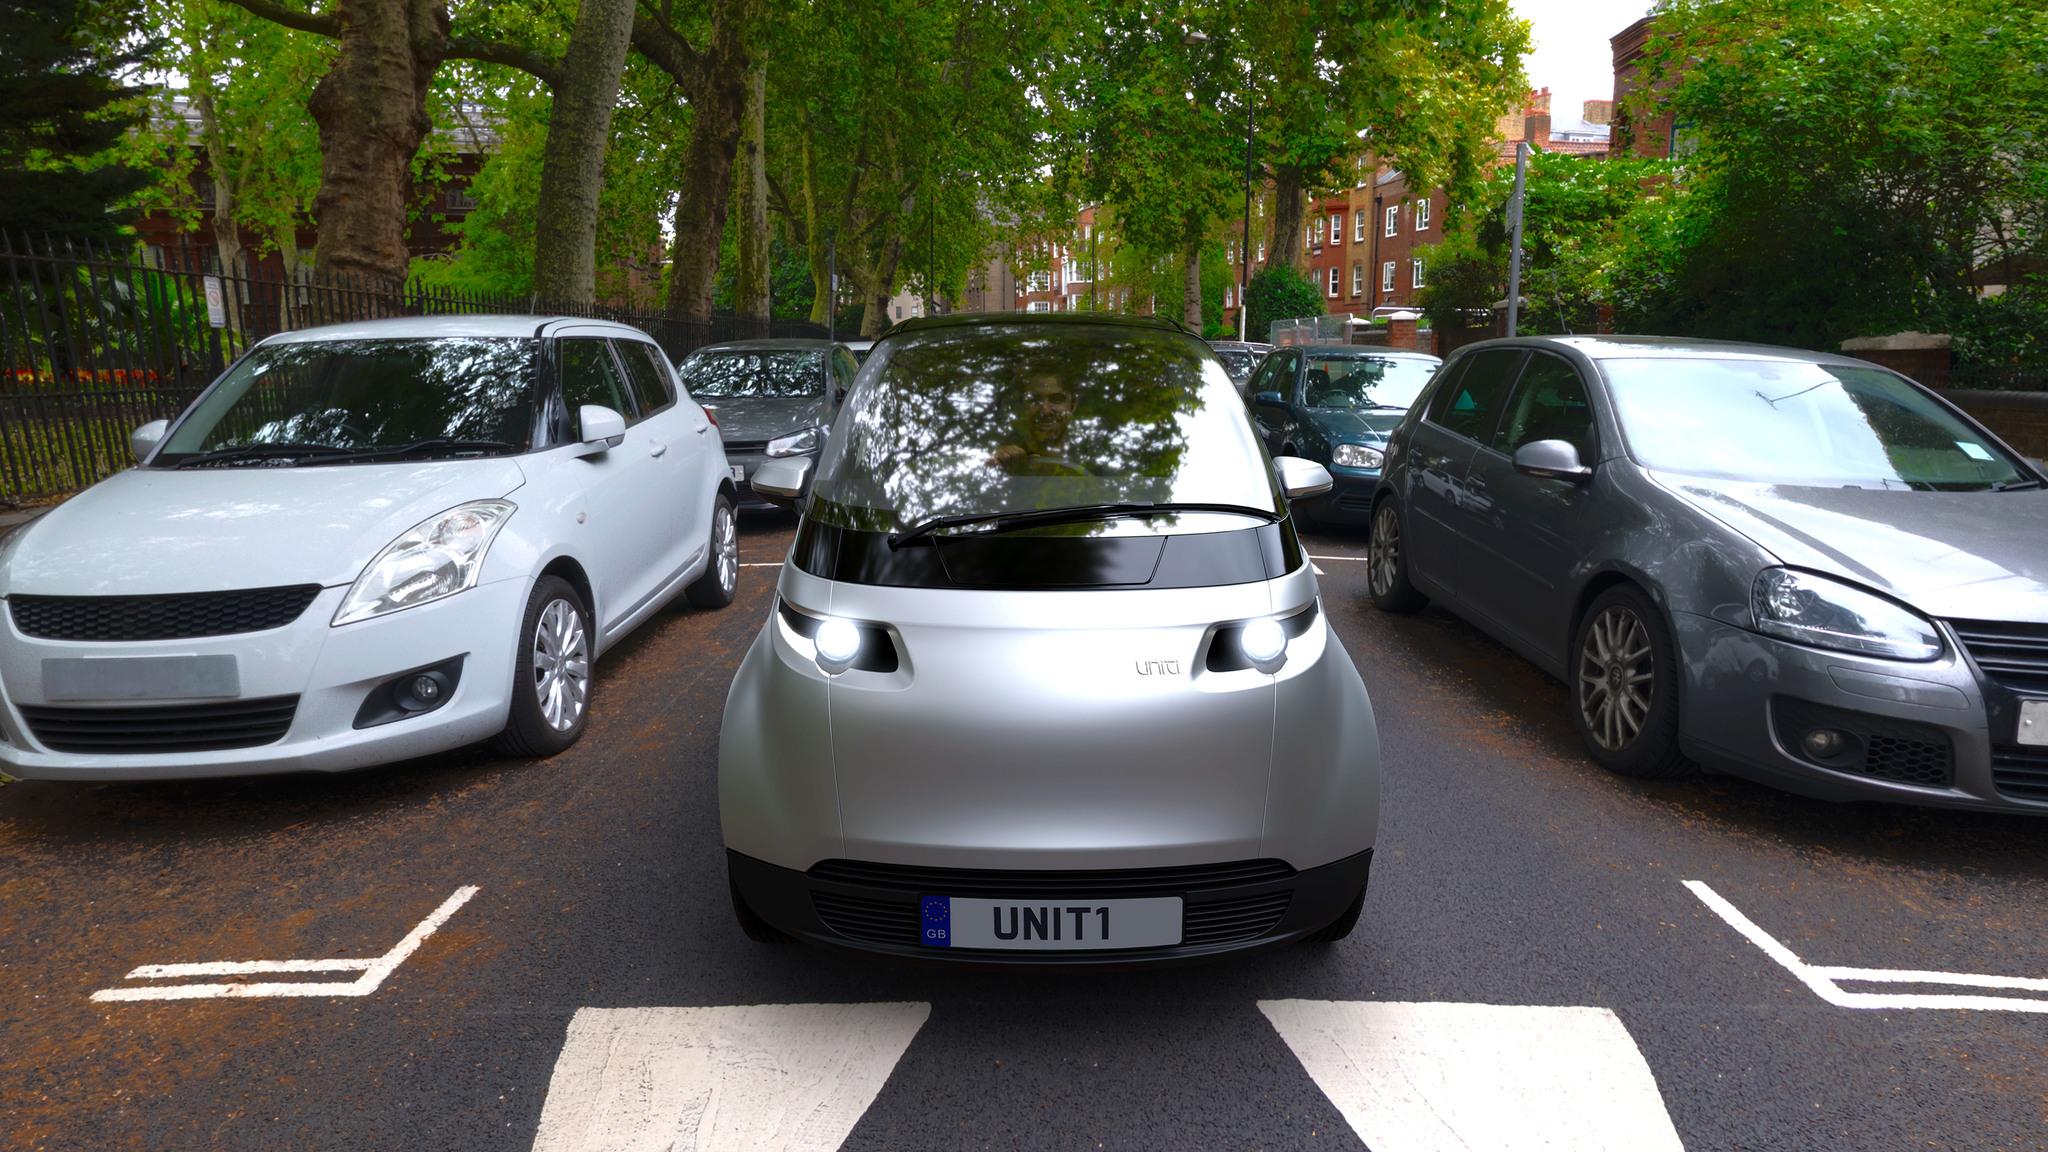 A futuristic-looking, silver-coloured car driving on the road between parked cars on each side.